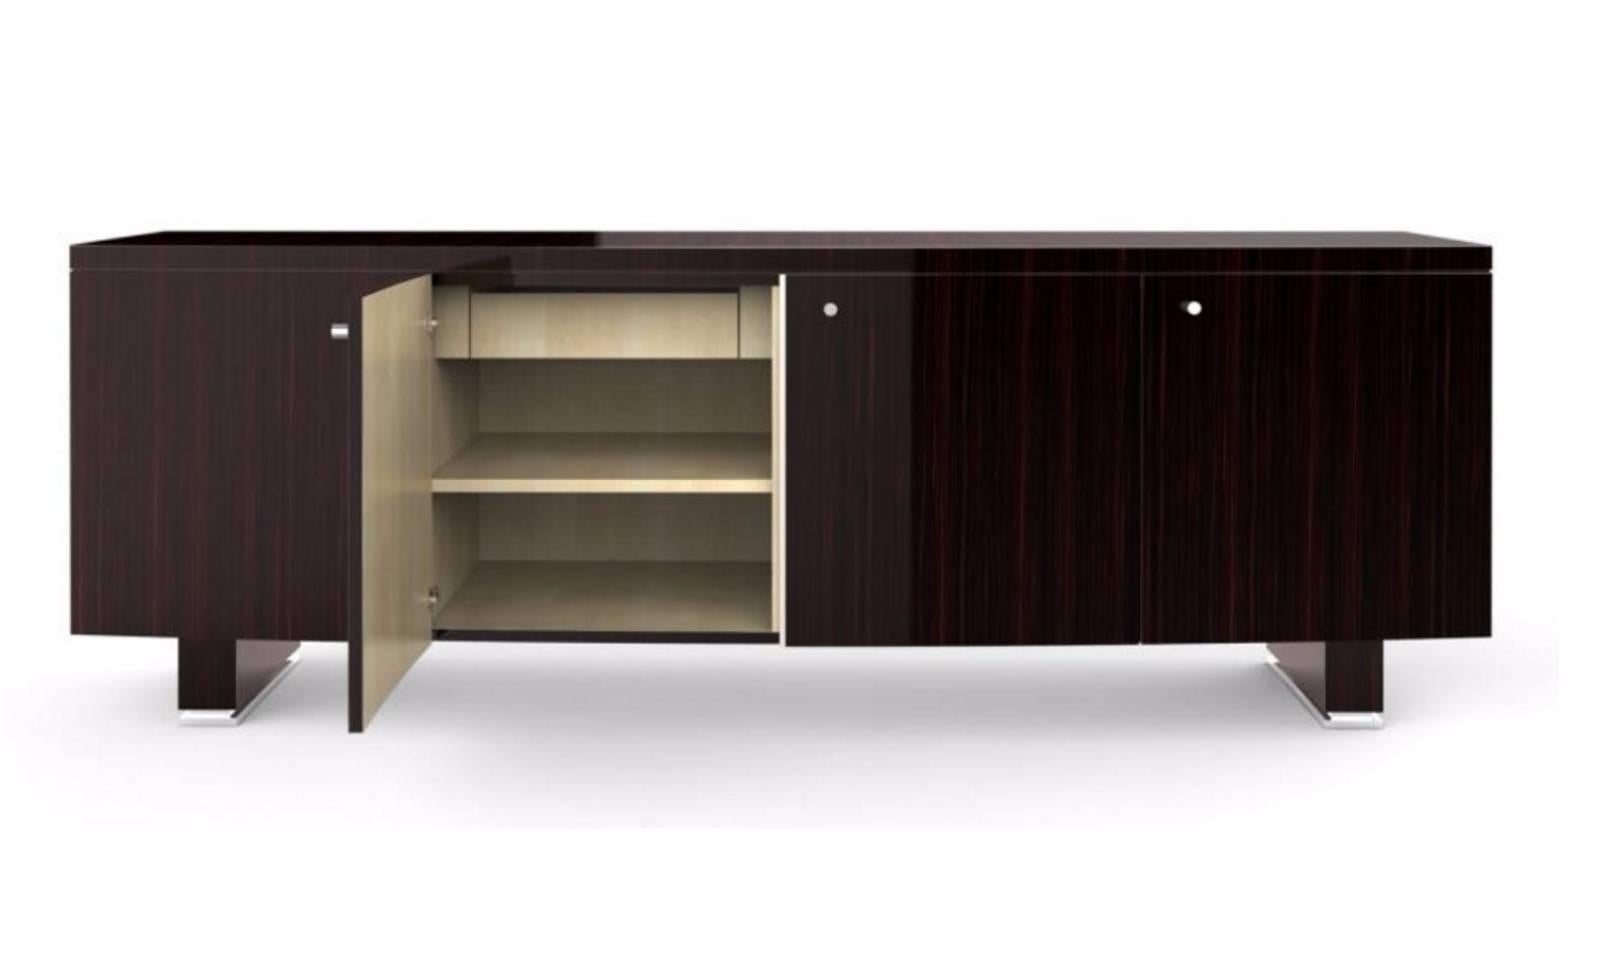 Monumental 10 feet long sideboard by Dakota Jackson. Intelion French polished Macassar credenza of modernist form. Four-door bowed front cabinet sits on square legs and silver chrome feet. Retails at 25,000. This piece is part of a recently acquired